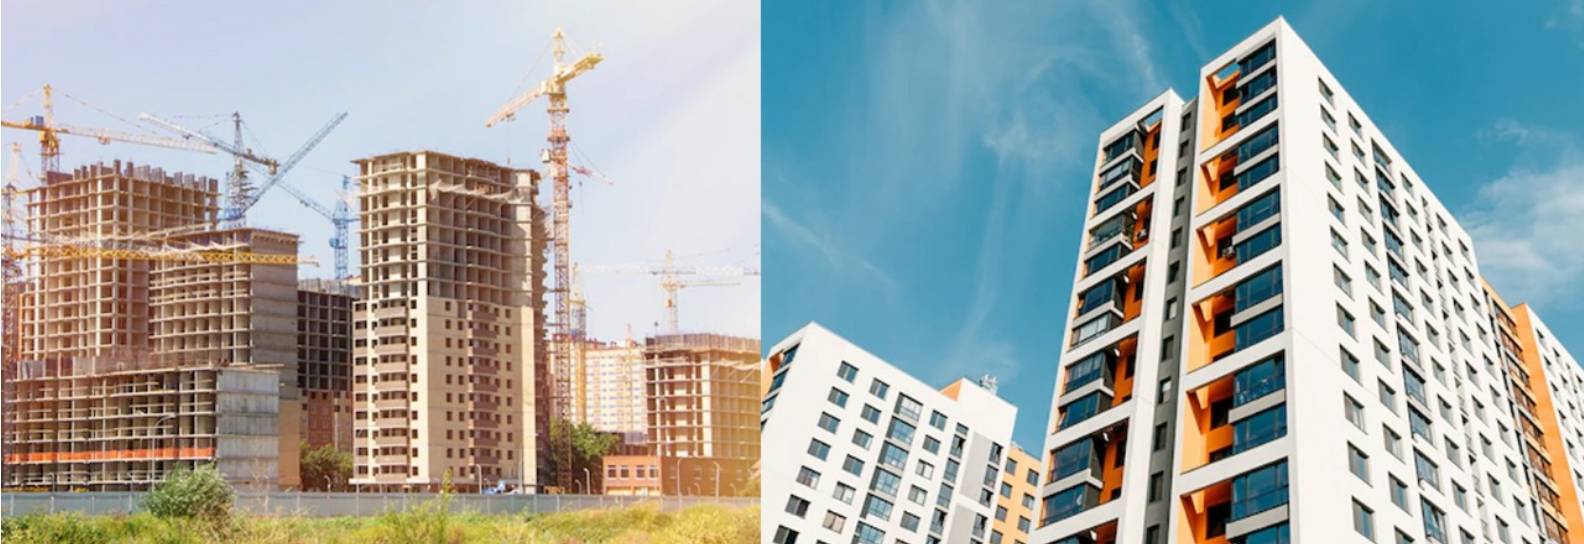 Buying an Underconstruction 2 BHK Flat in Mulund Mumbai - Under Construction vs Ready to move in